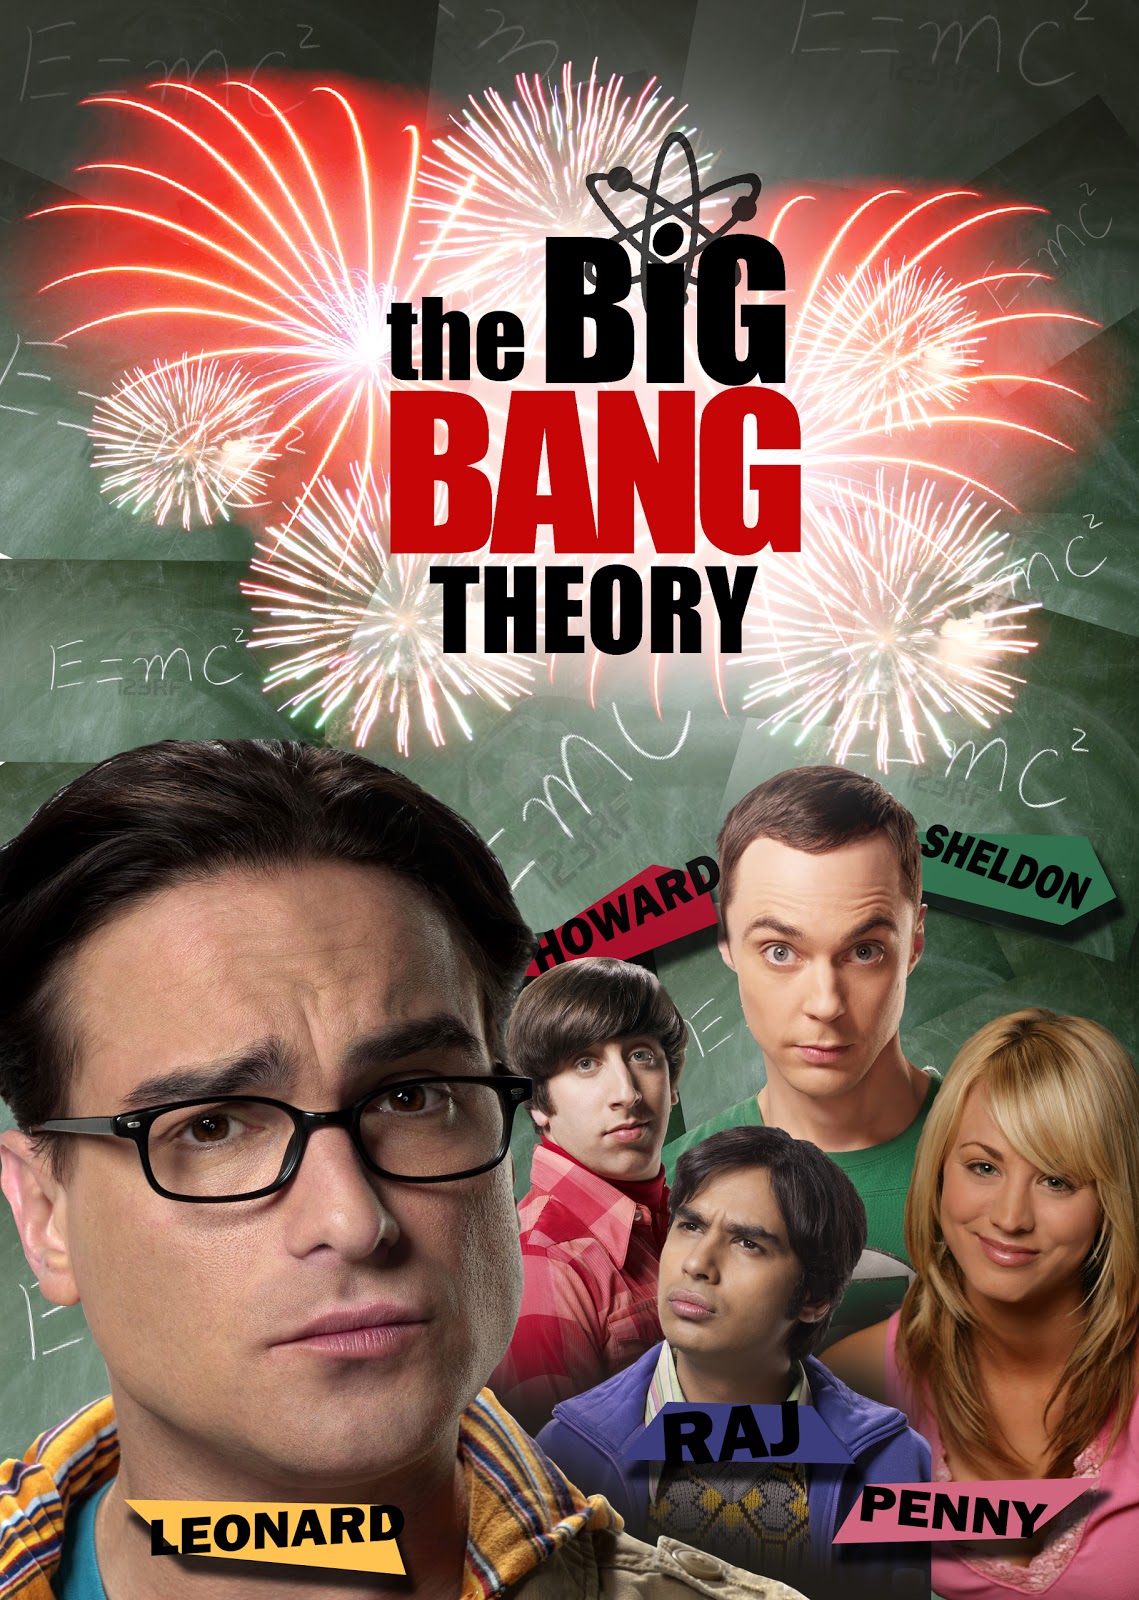 The Big Bang Theory Posters | Tv Series Posters and Cast1139 x 1600